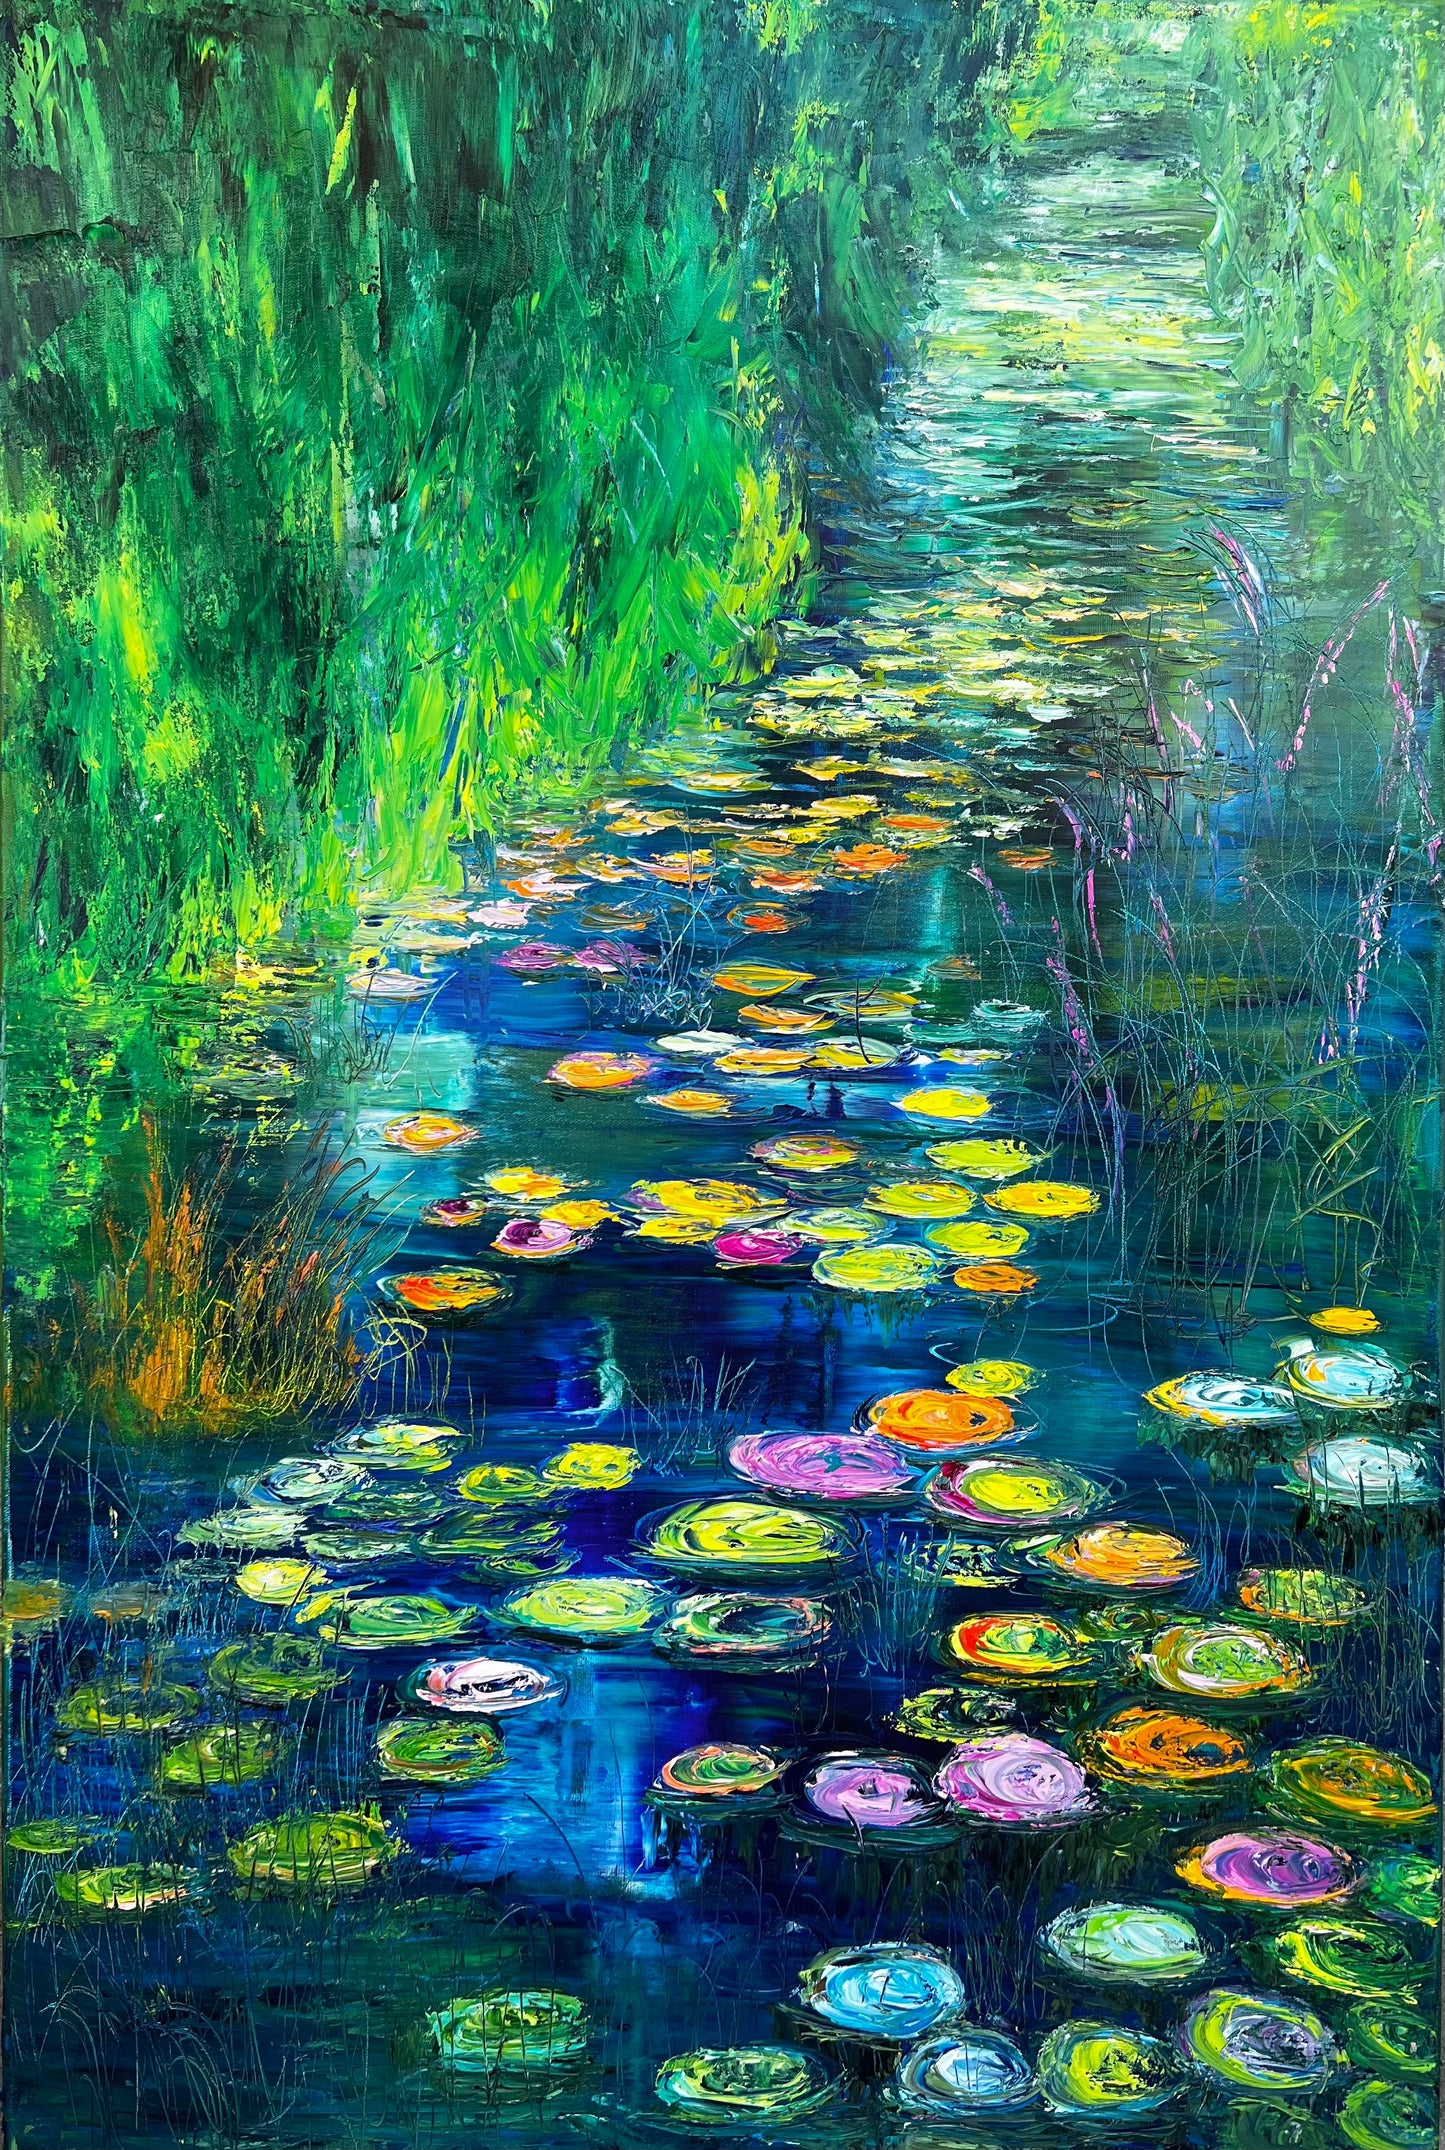 Water Lily, OIL, 36" X 24"